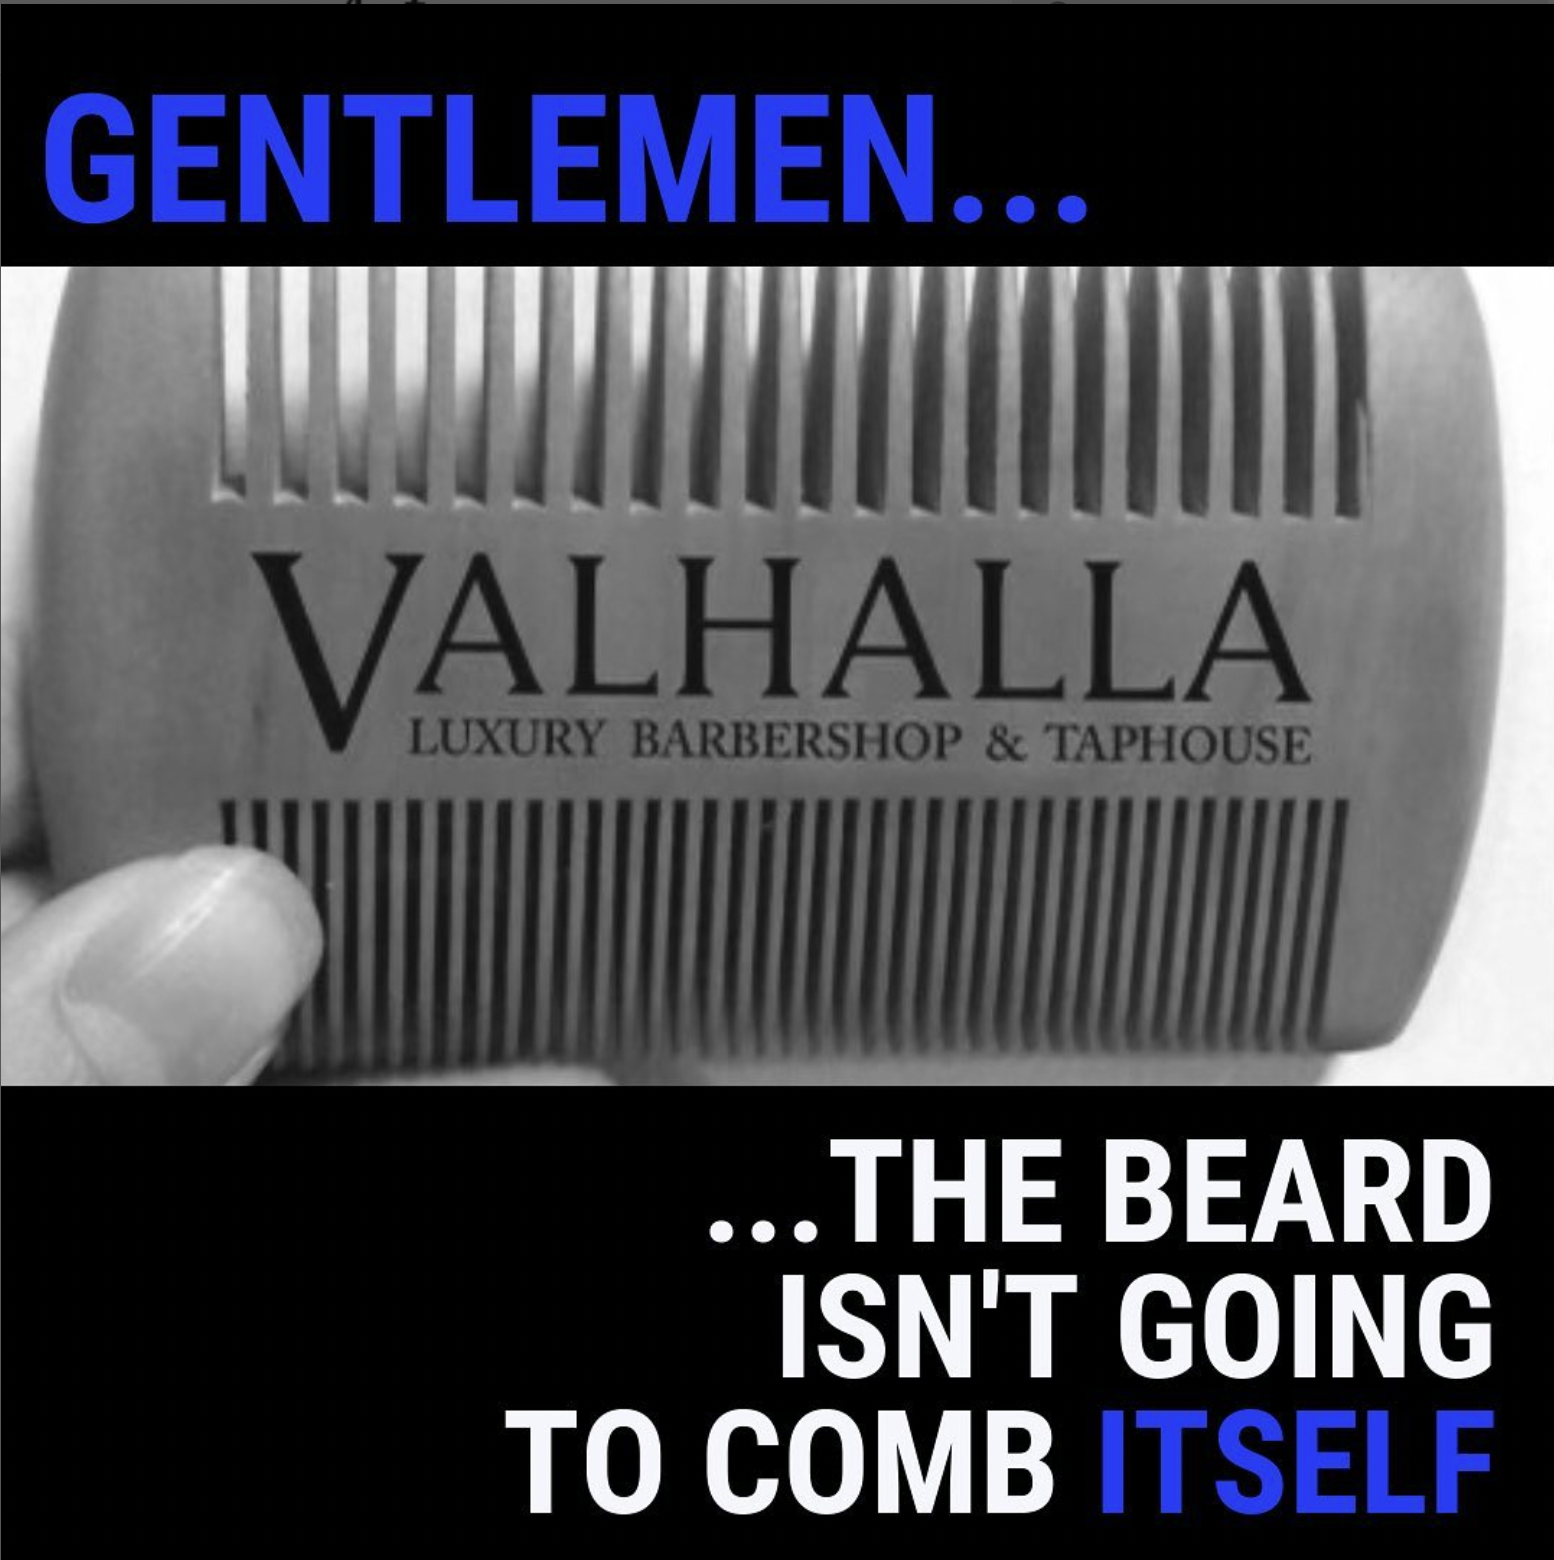 Valhalla Barbershop and Taphouse